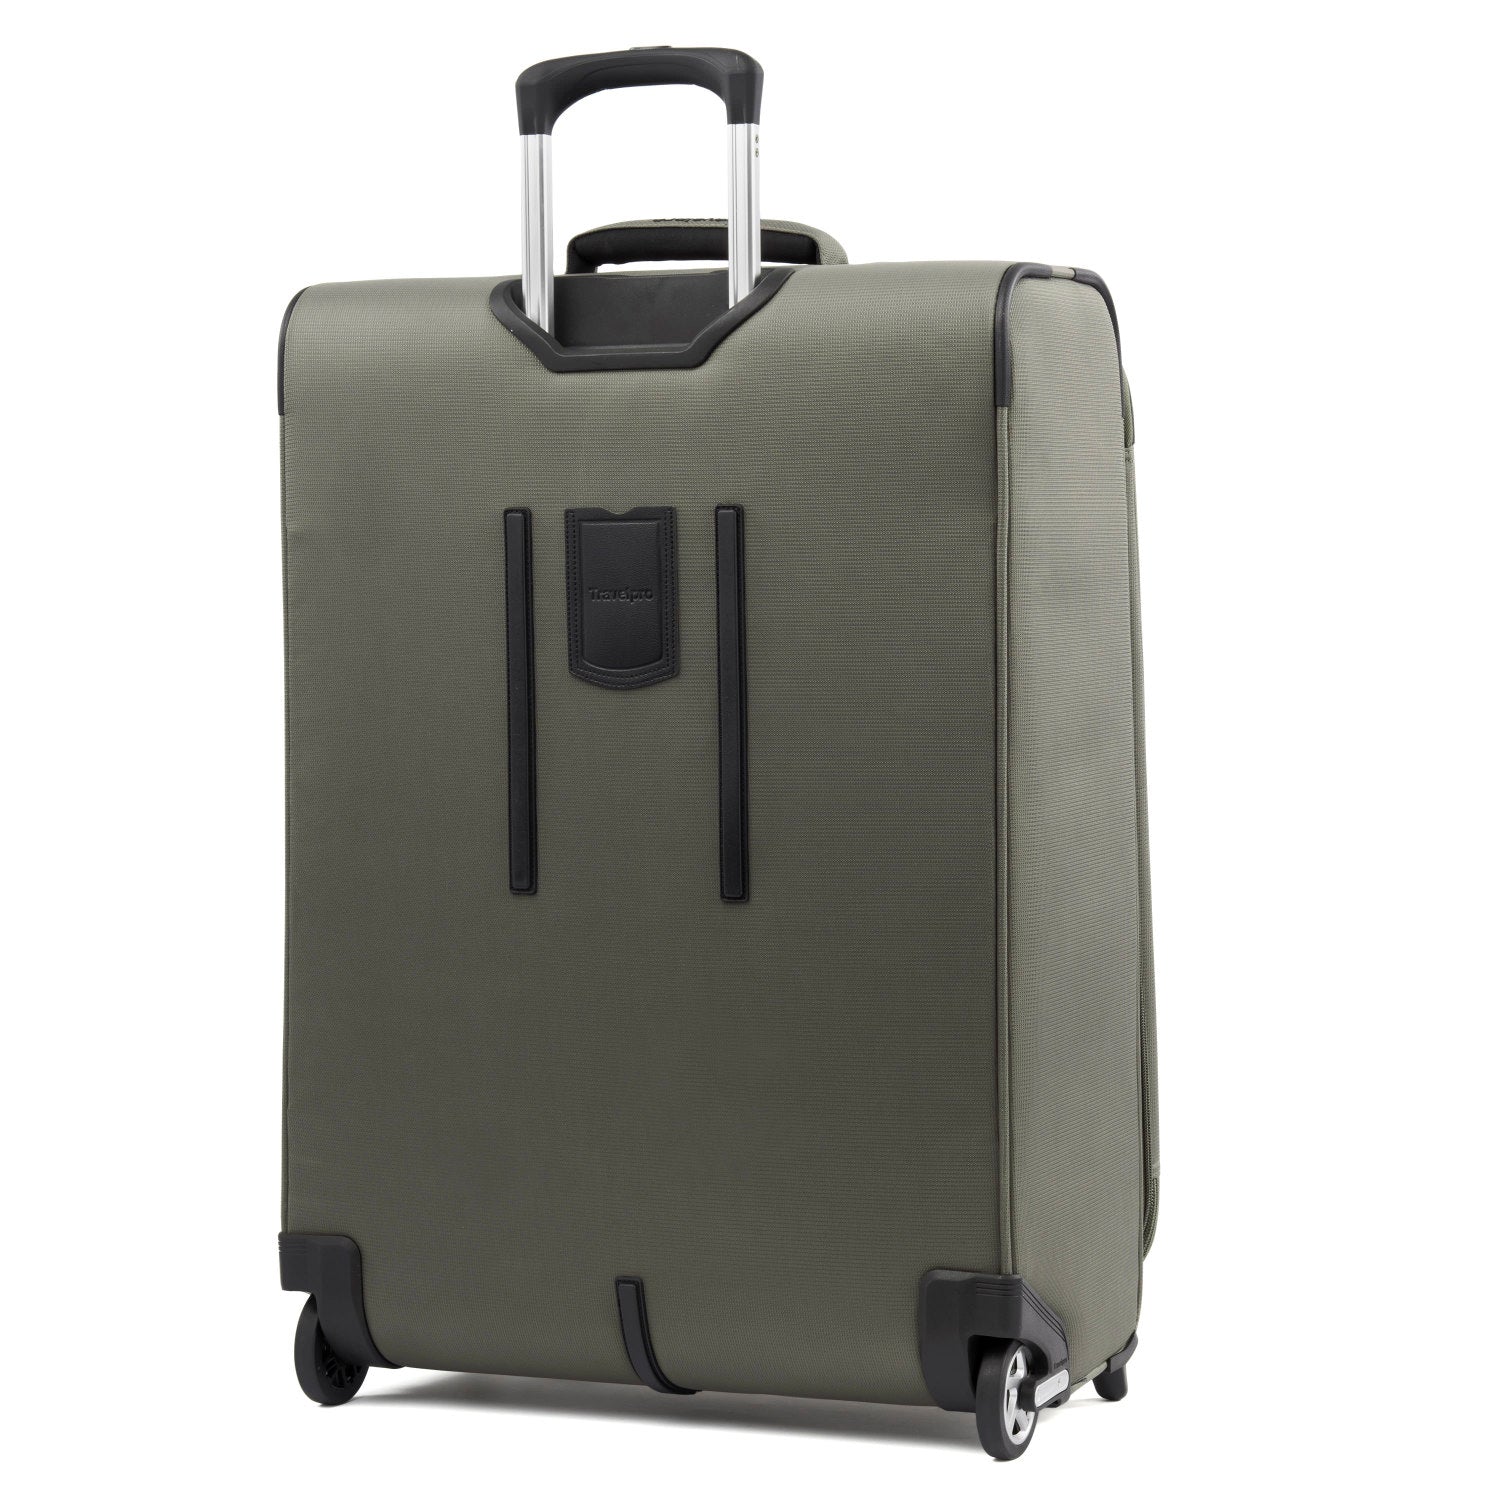 The Best Rollaboard Carry-On Suitcases for Regional Planes